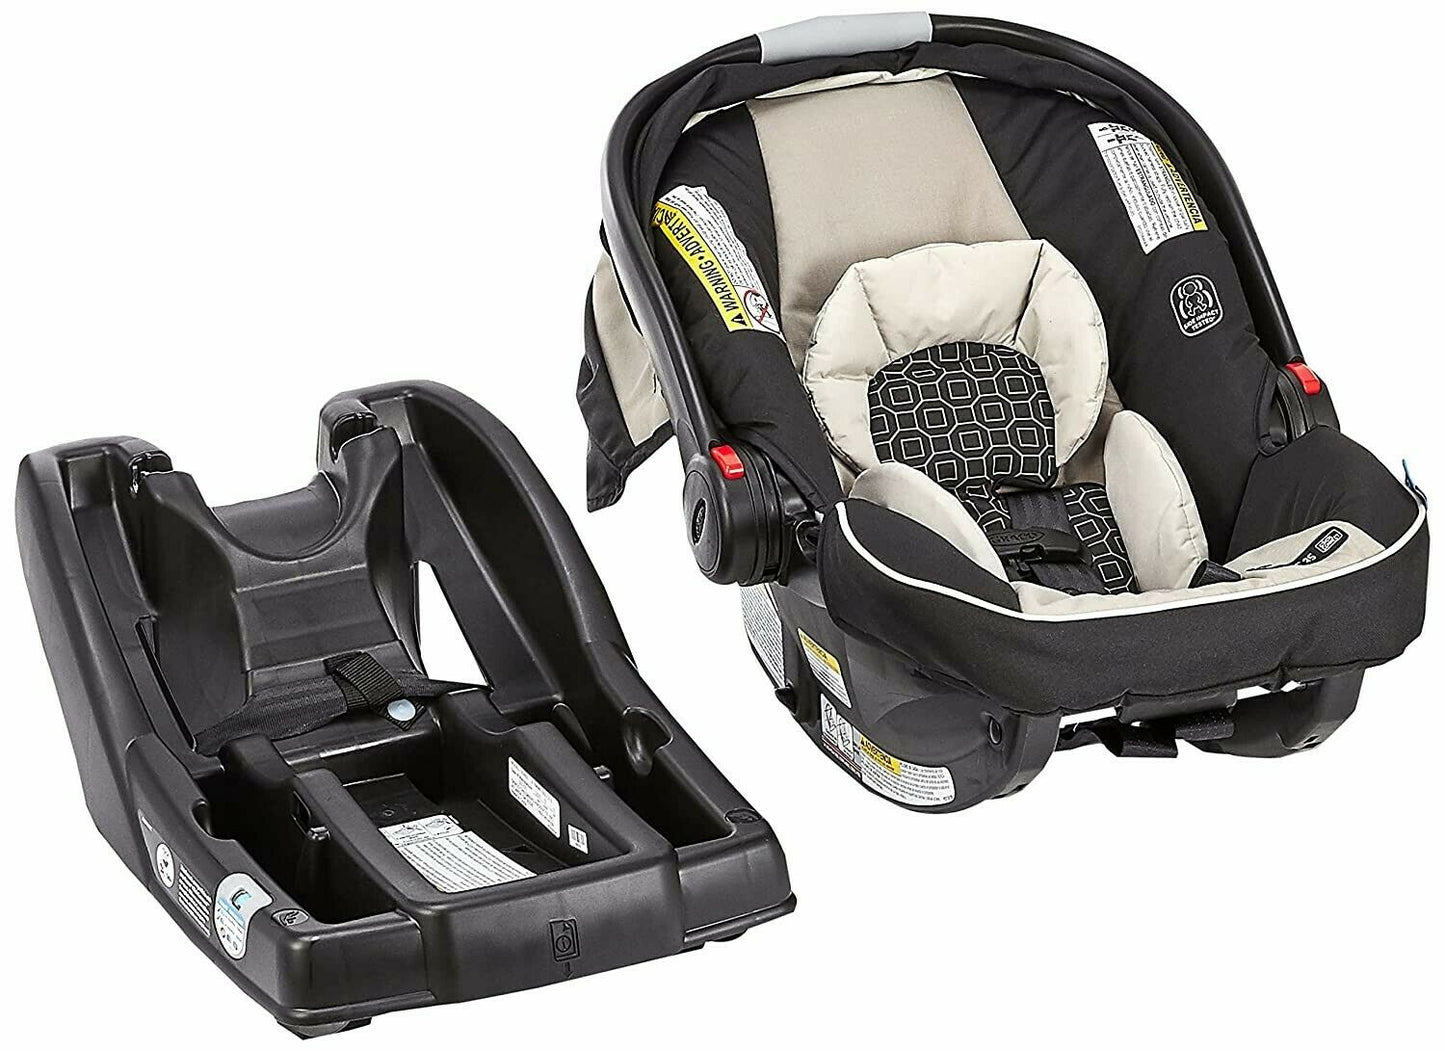 Graco Baby Stroller FastAction Fold Sport with Car Seat Travel System